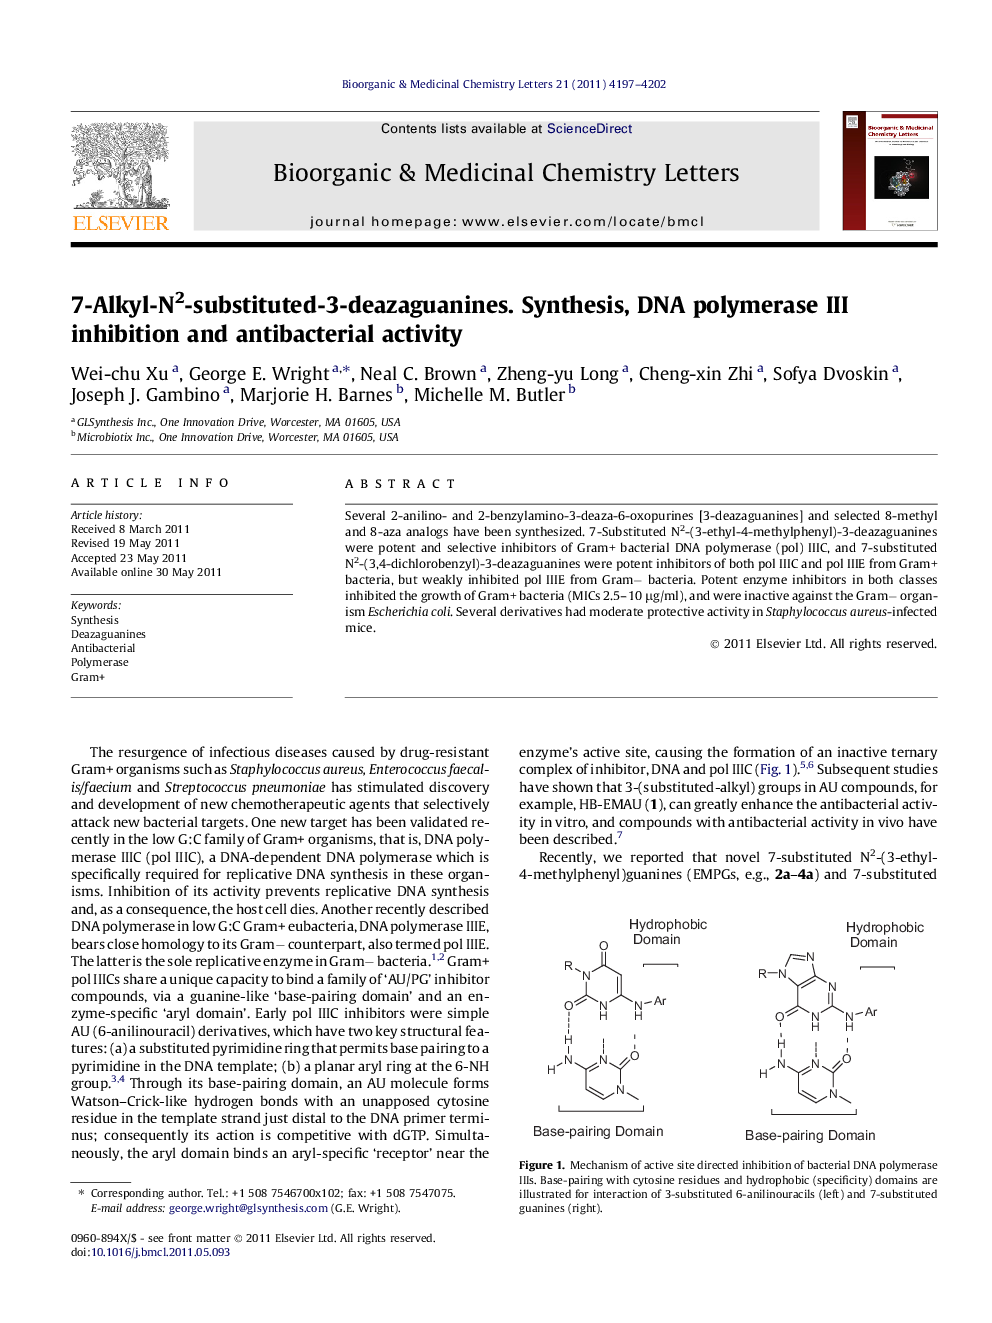 7-Alkyl-N2-substituted-3-deazaguanines. Synthesis, DNA polymerase III inhibition and antibacterial activity